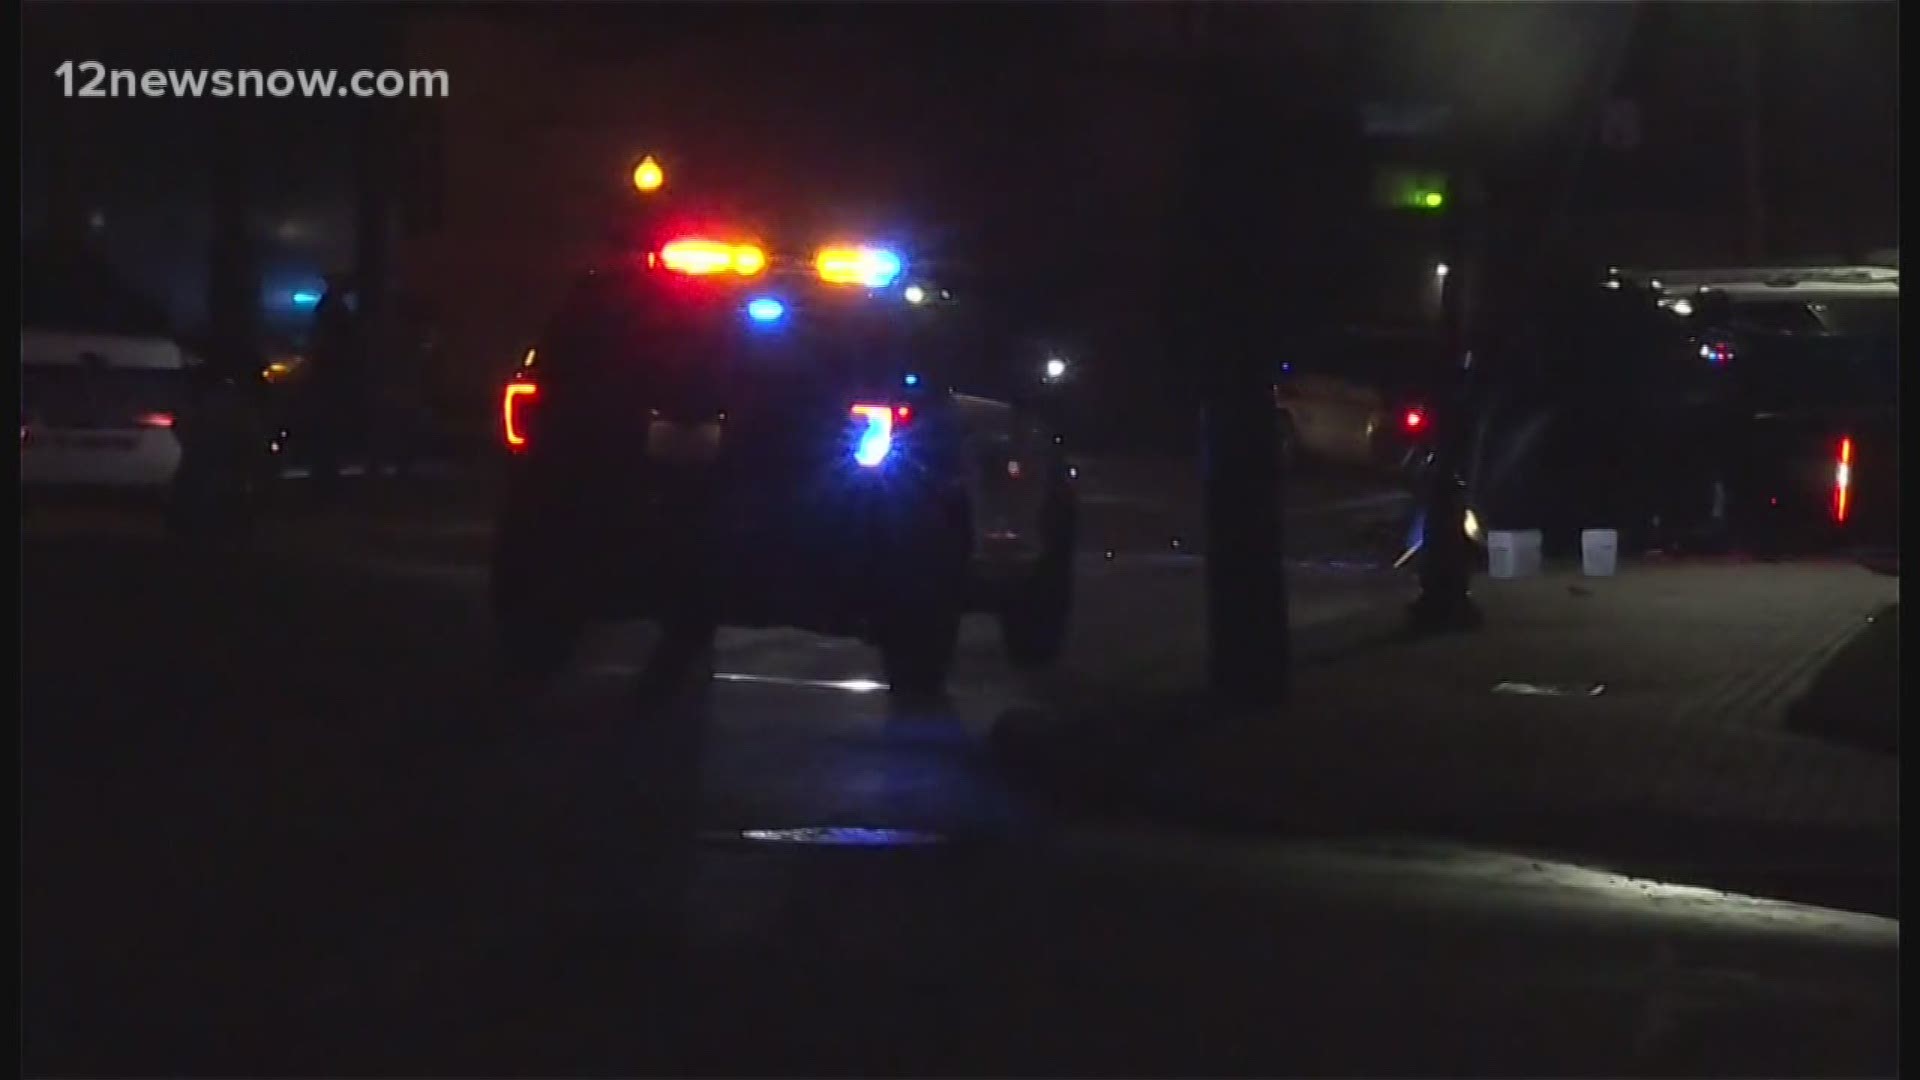 Police told 12News another officer was being assaulted, and the driver was on the way to help